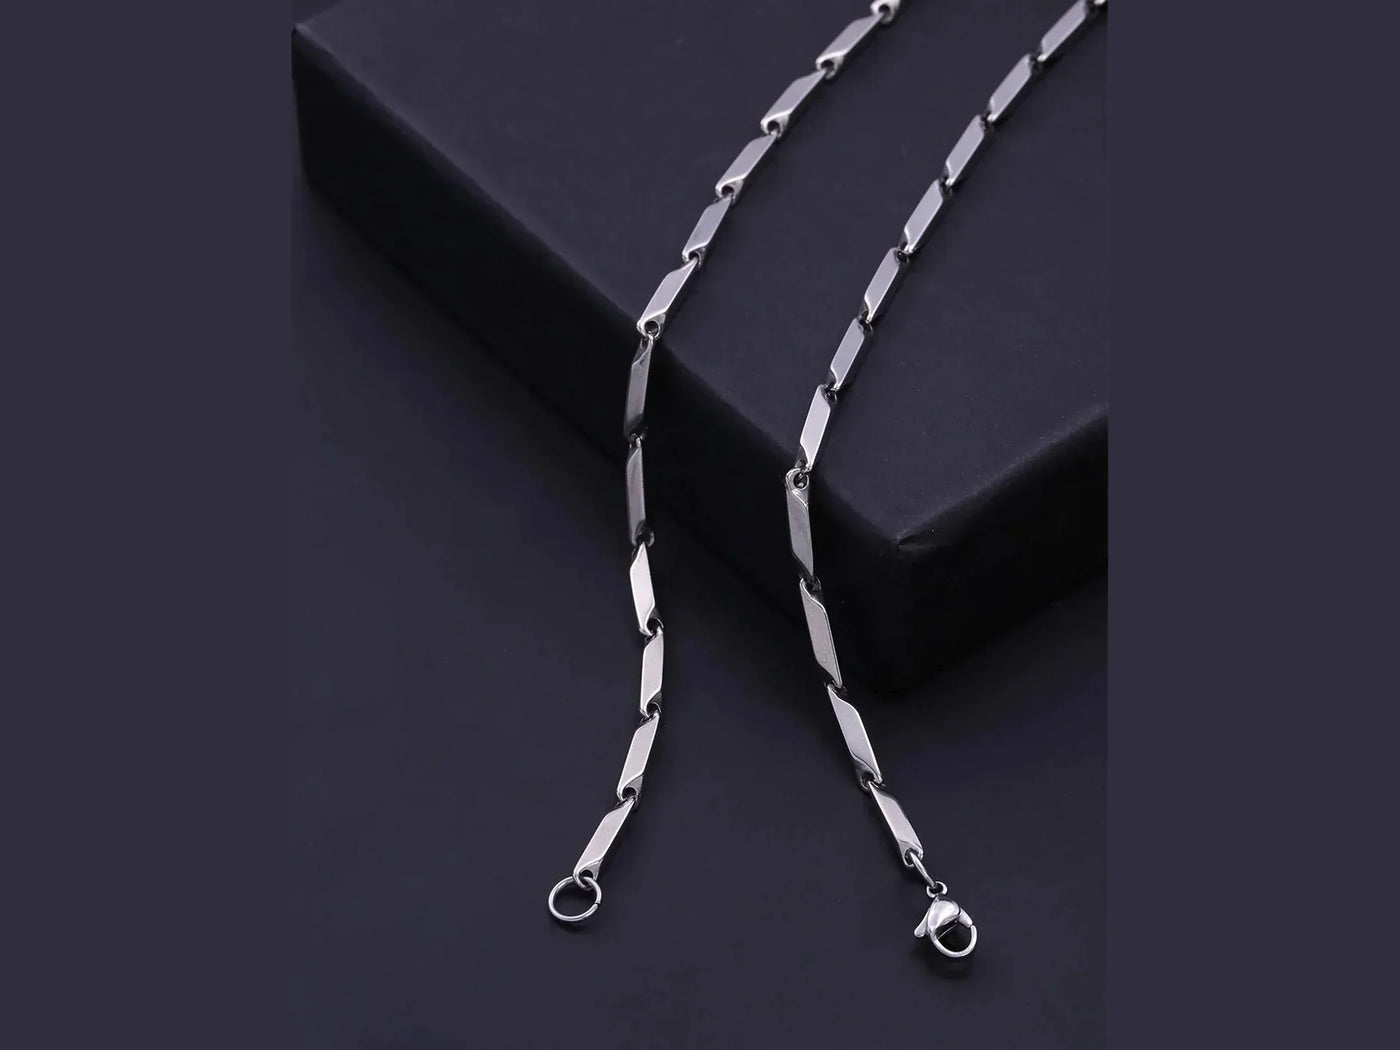 Pure Stainless Steel Rice Chain